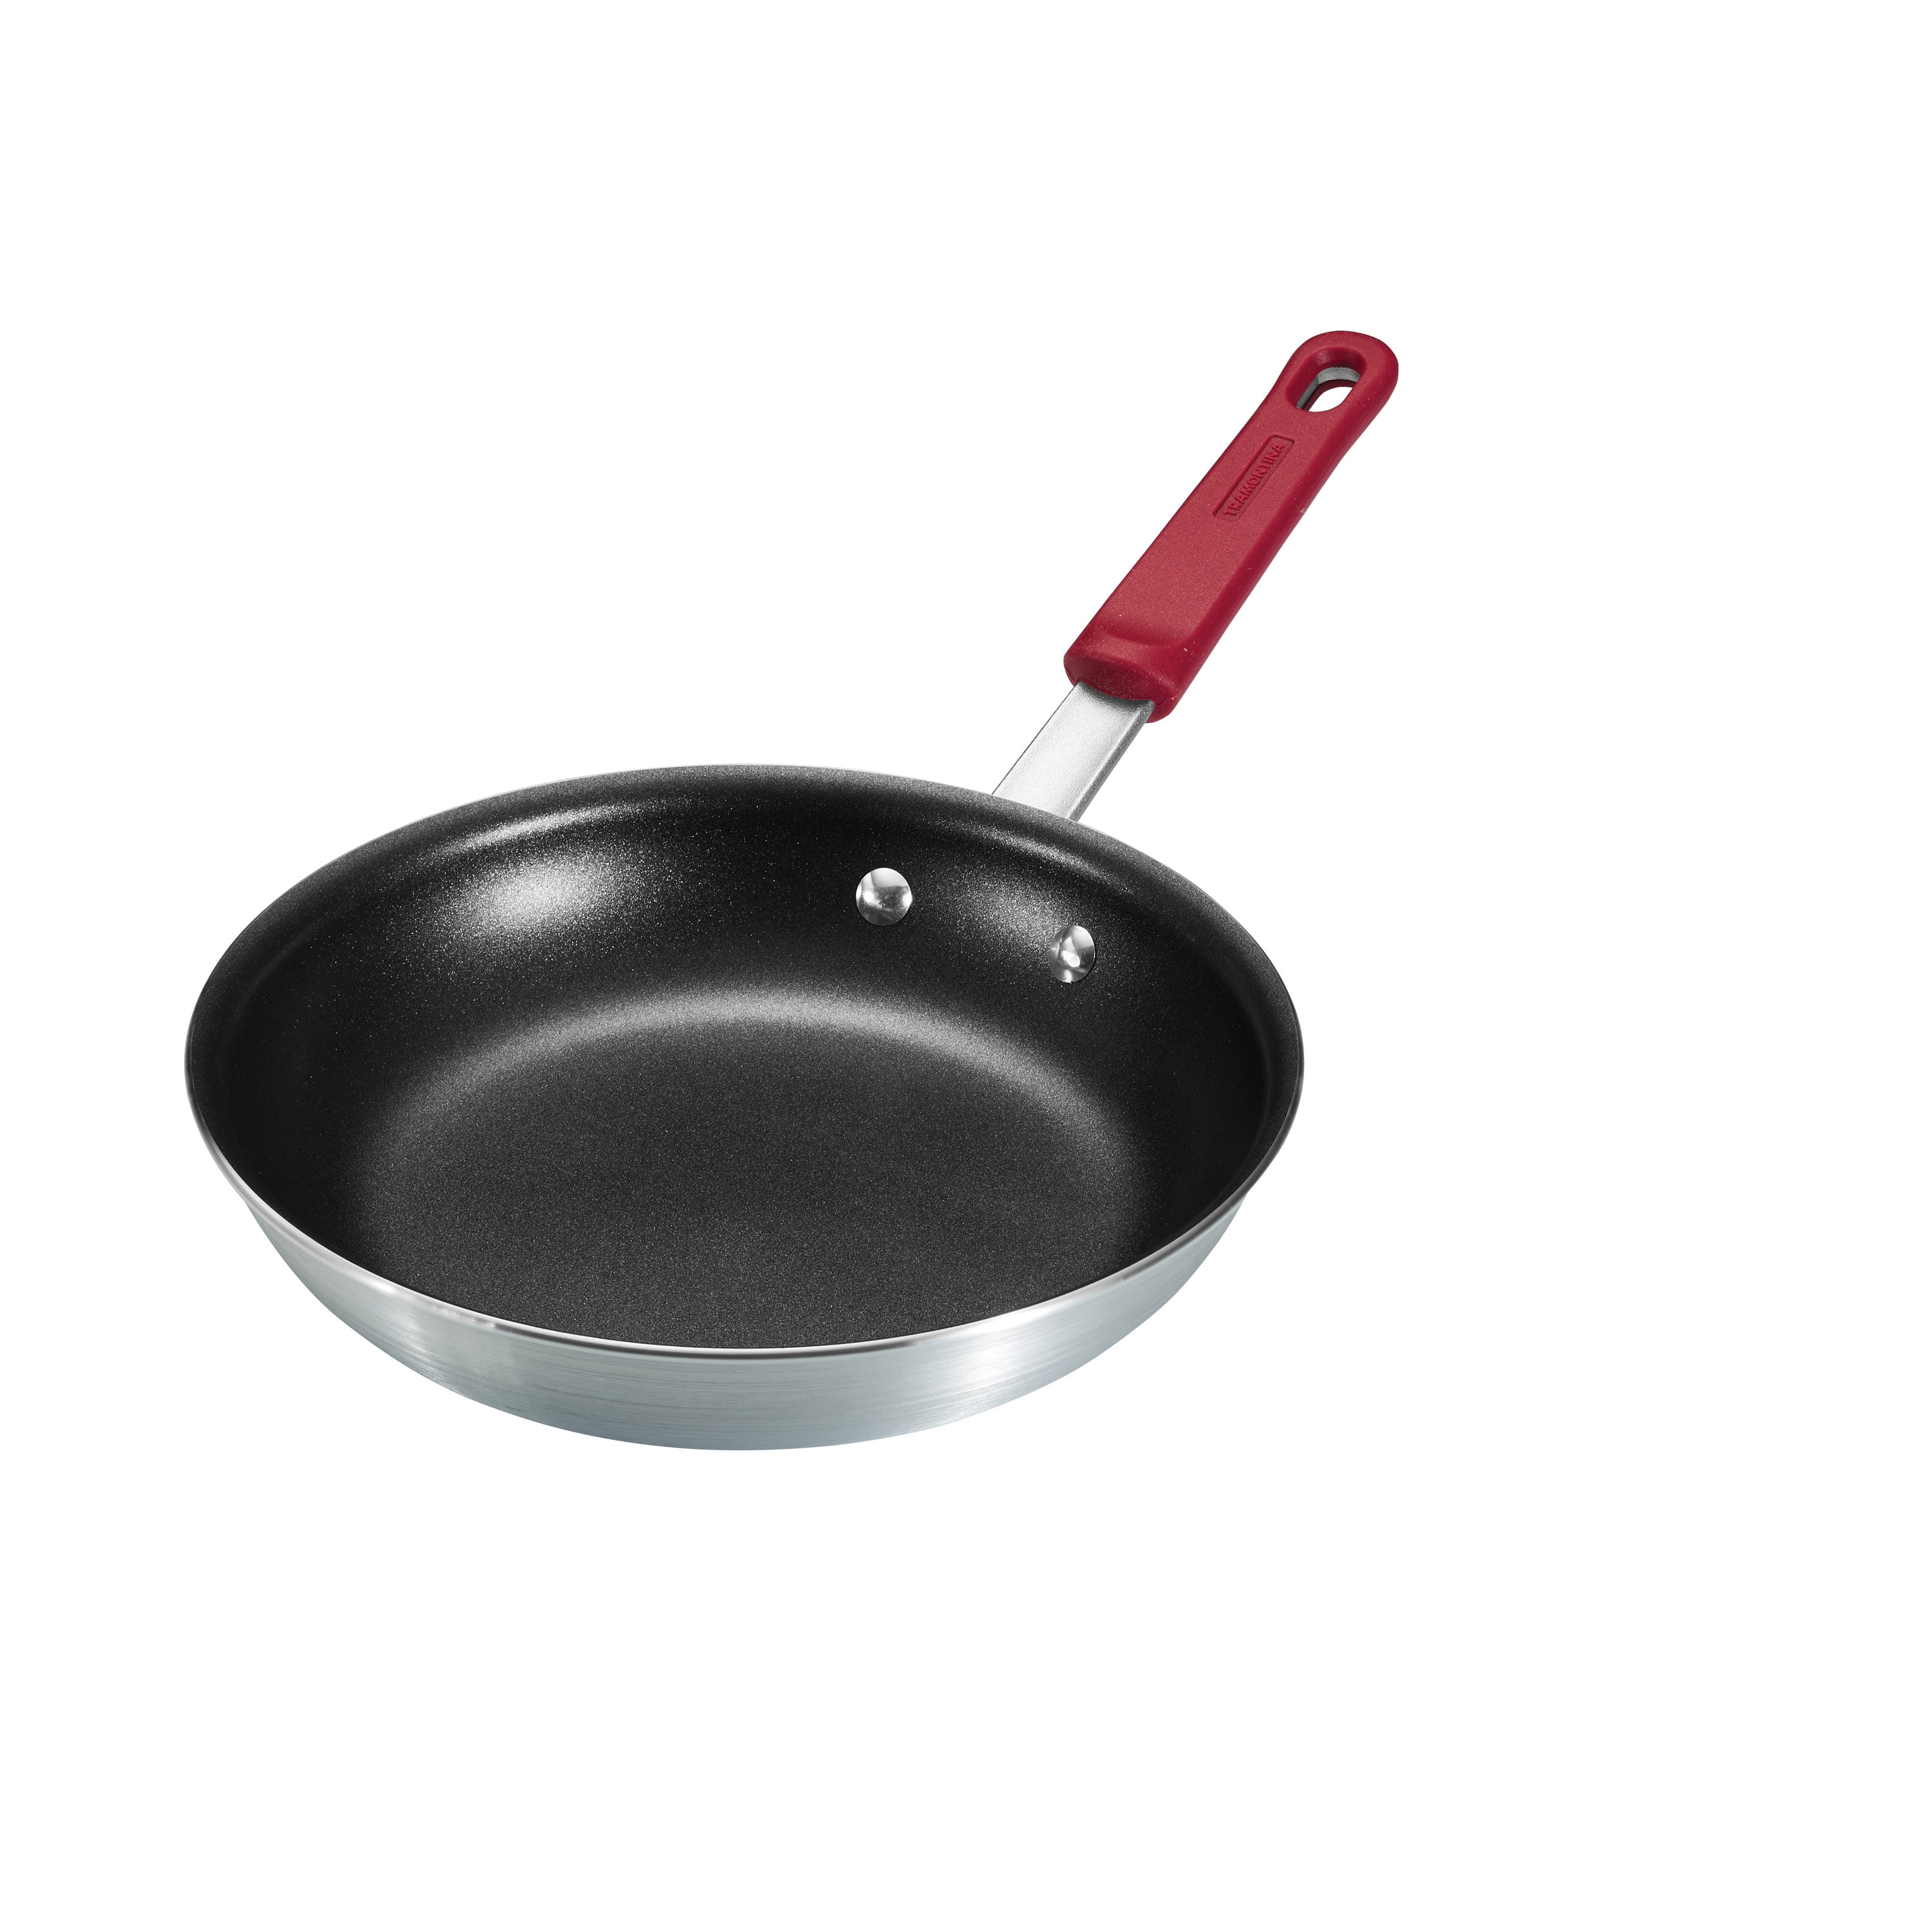 Non-Stick Fry Pan 14-Inch Commercial Skillet Pans Restaurant Cooking Tool-Silver 